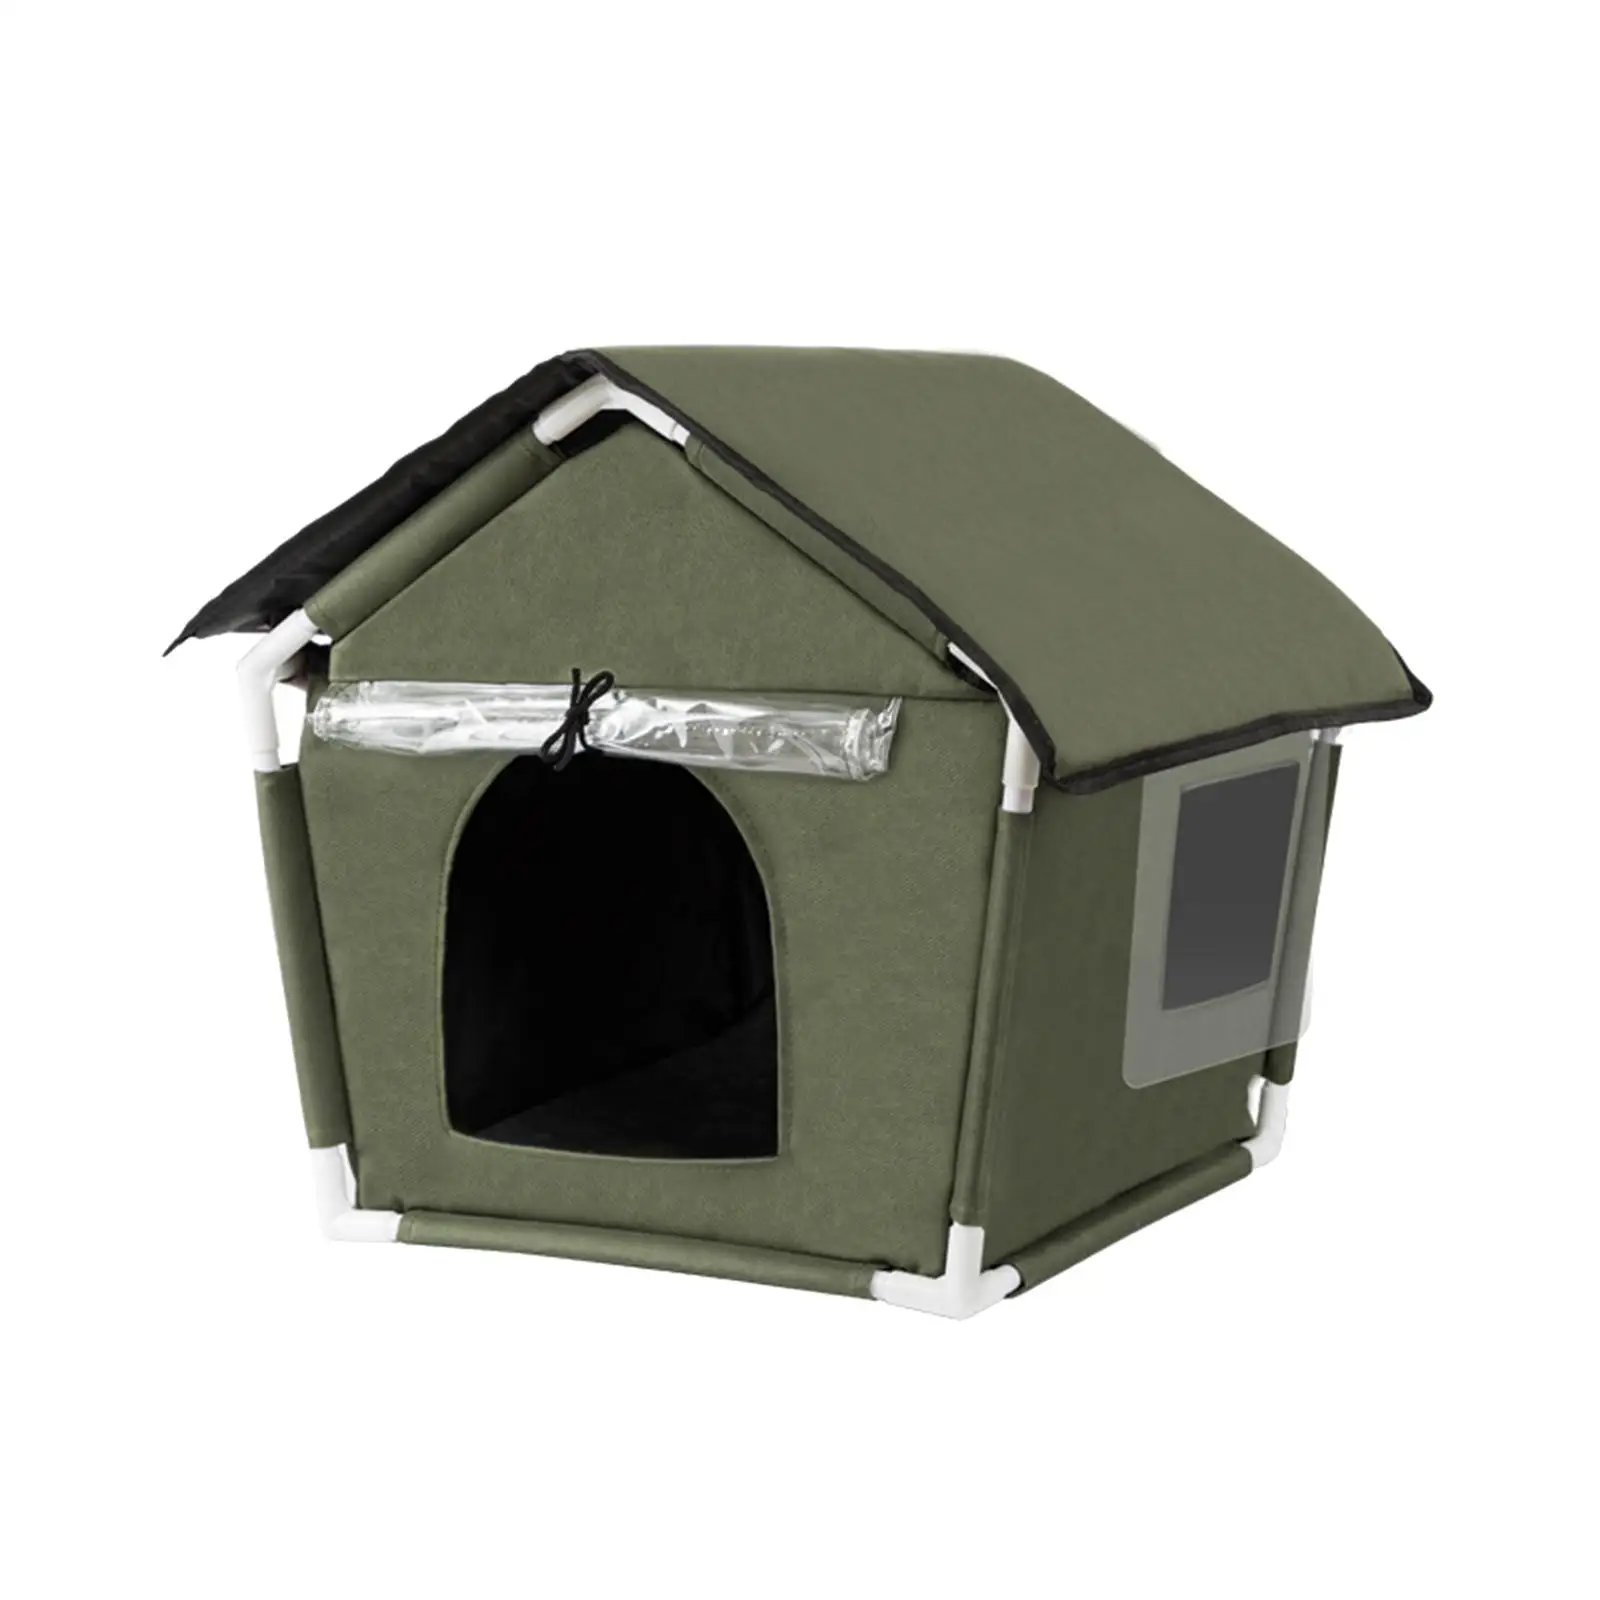 Cat Bed Rainproof Pet Bed Foldable Cave House Cat Nest Sleeping Bed for Kittens or Small Dogs Courtyard Kitty Home Outdoor